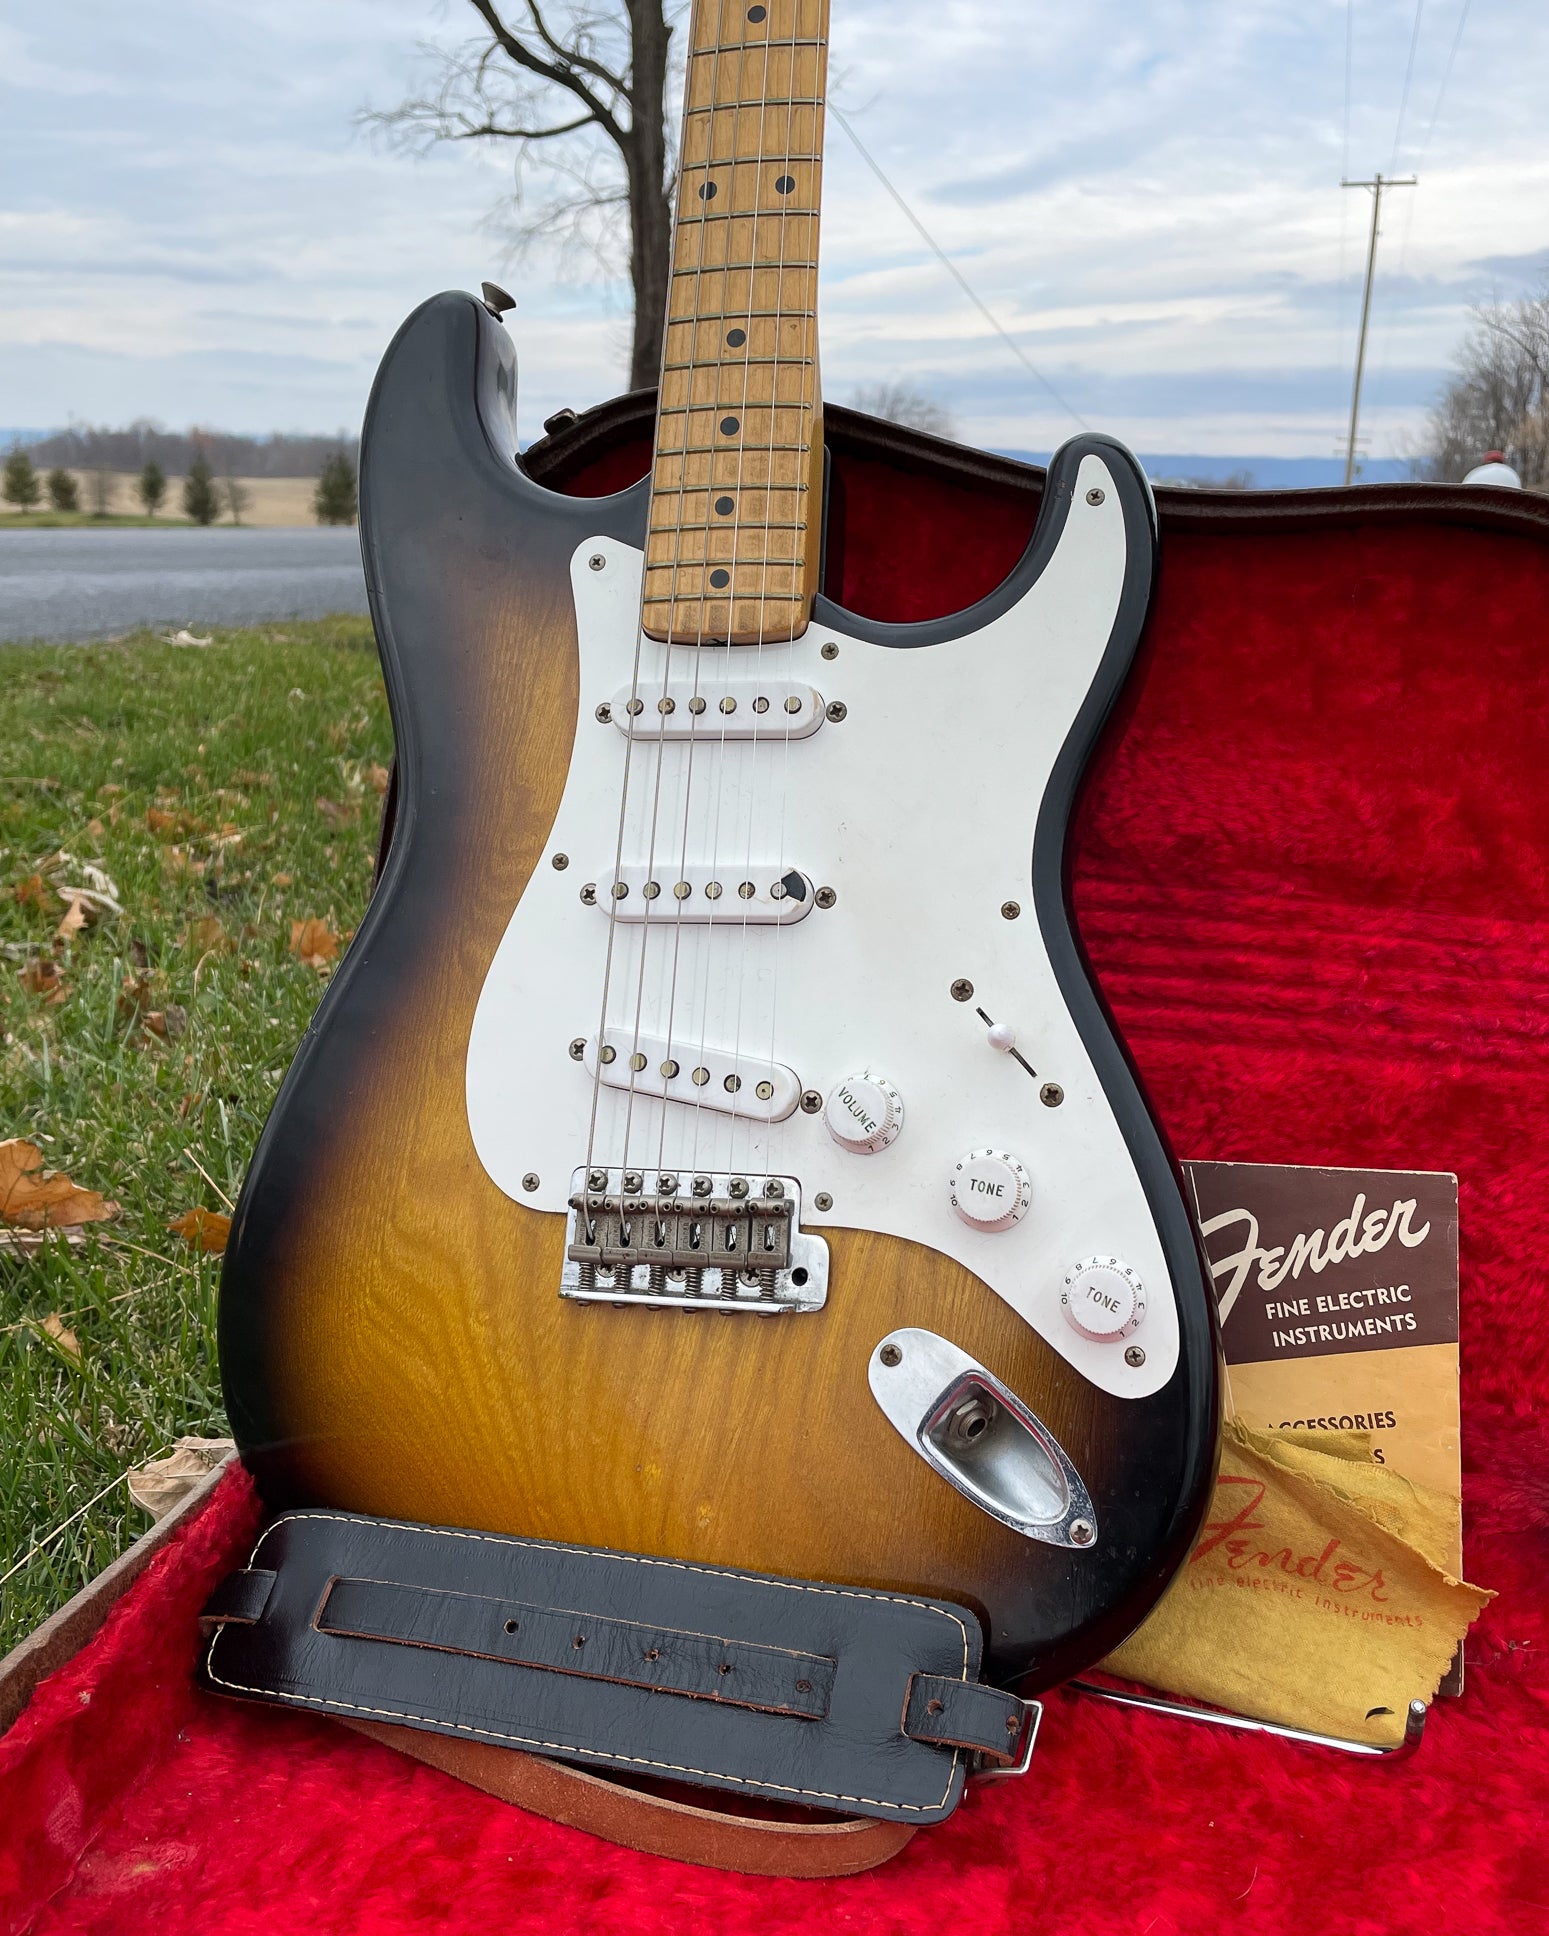 Fender stratocaster guitar buyer and collector